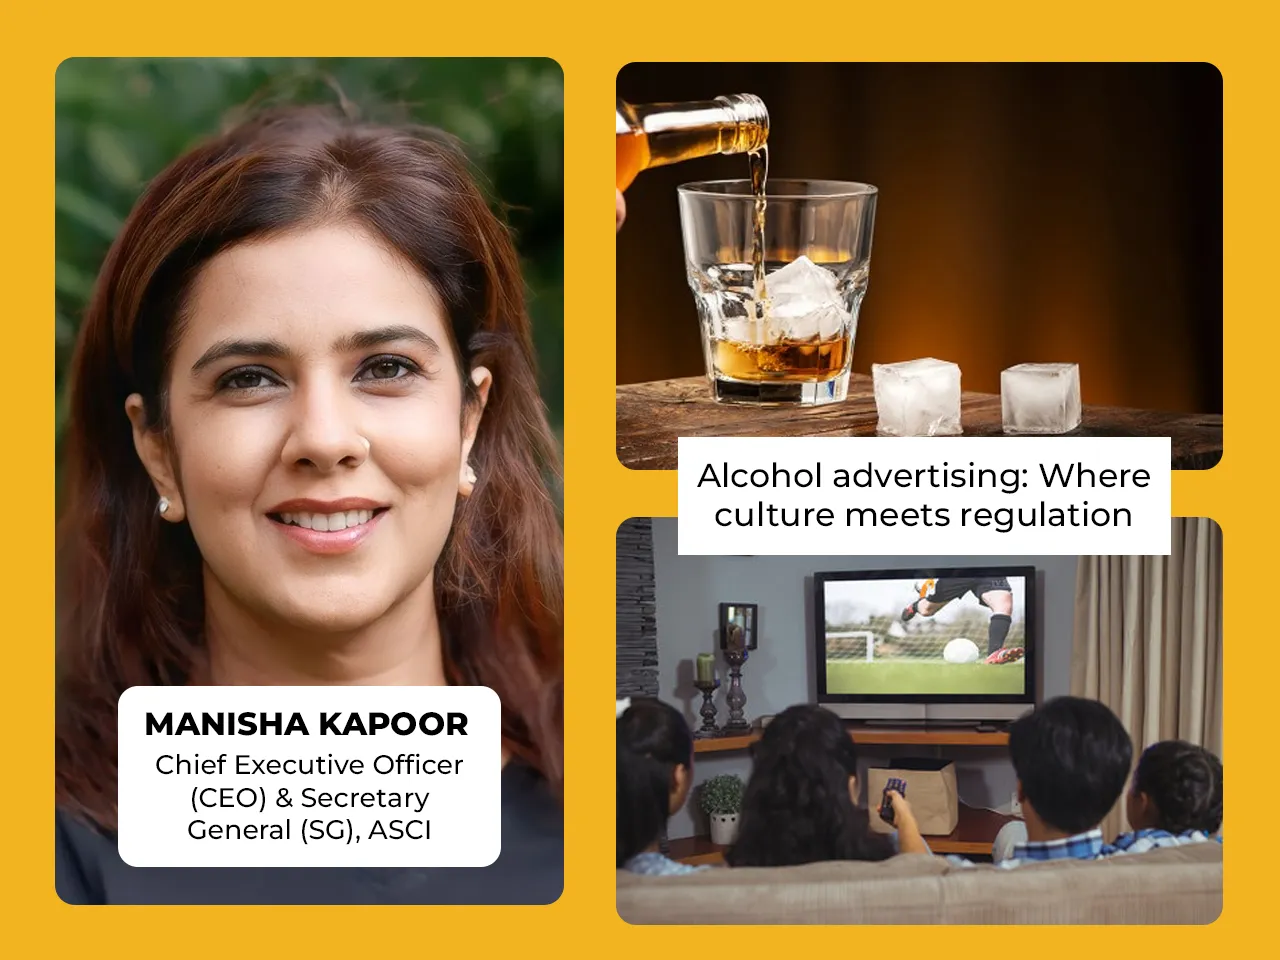 Alcohol advertising: Where culture meets regulation